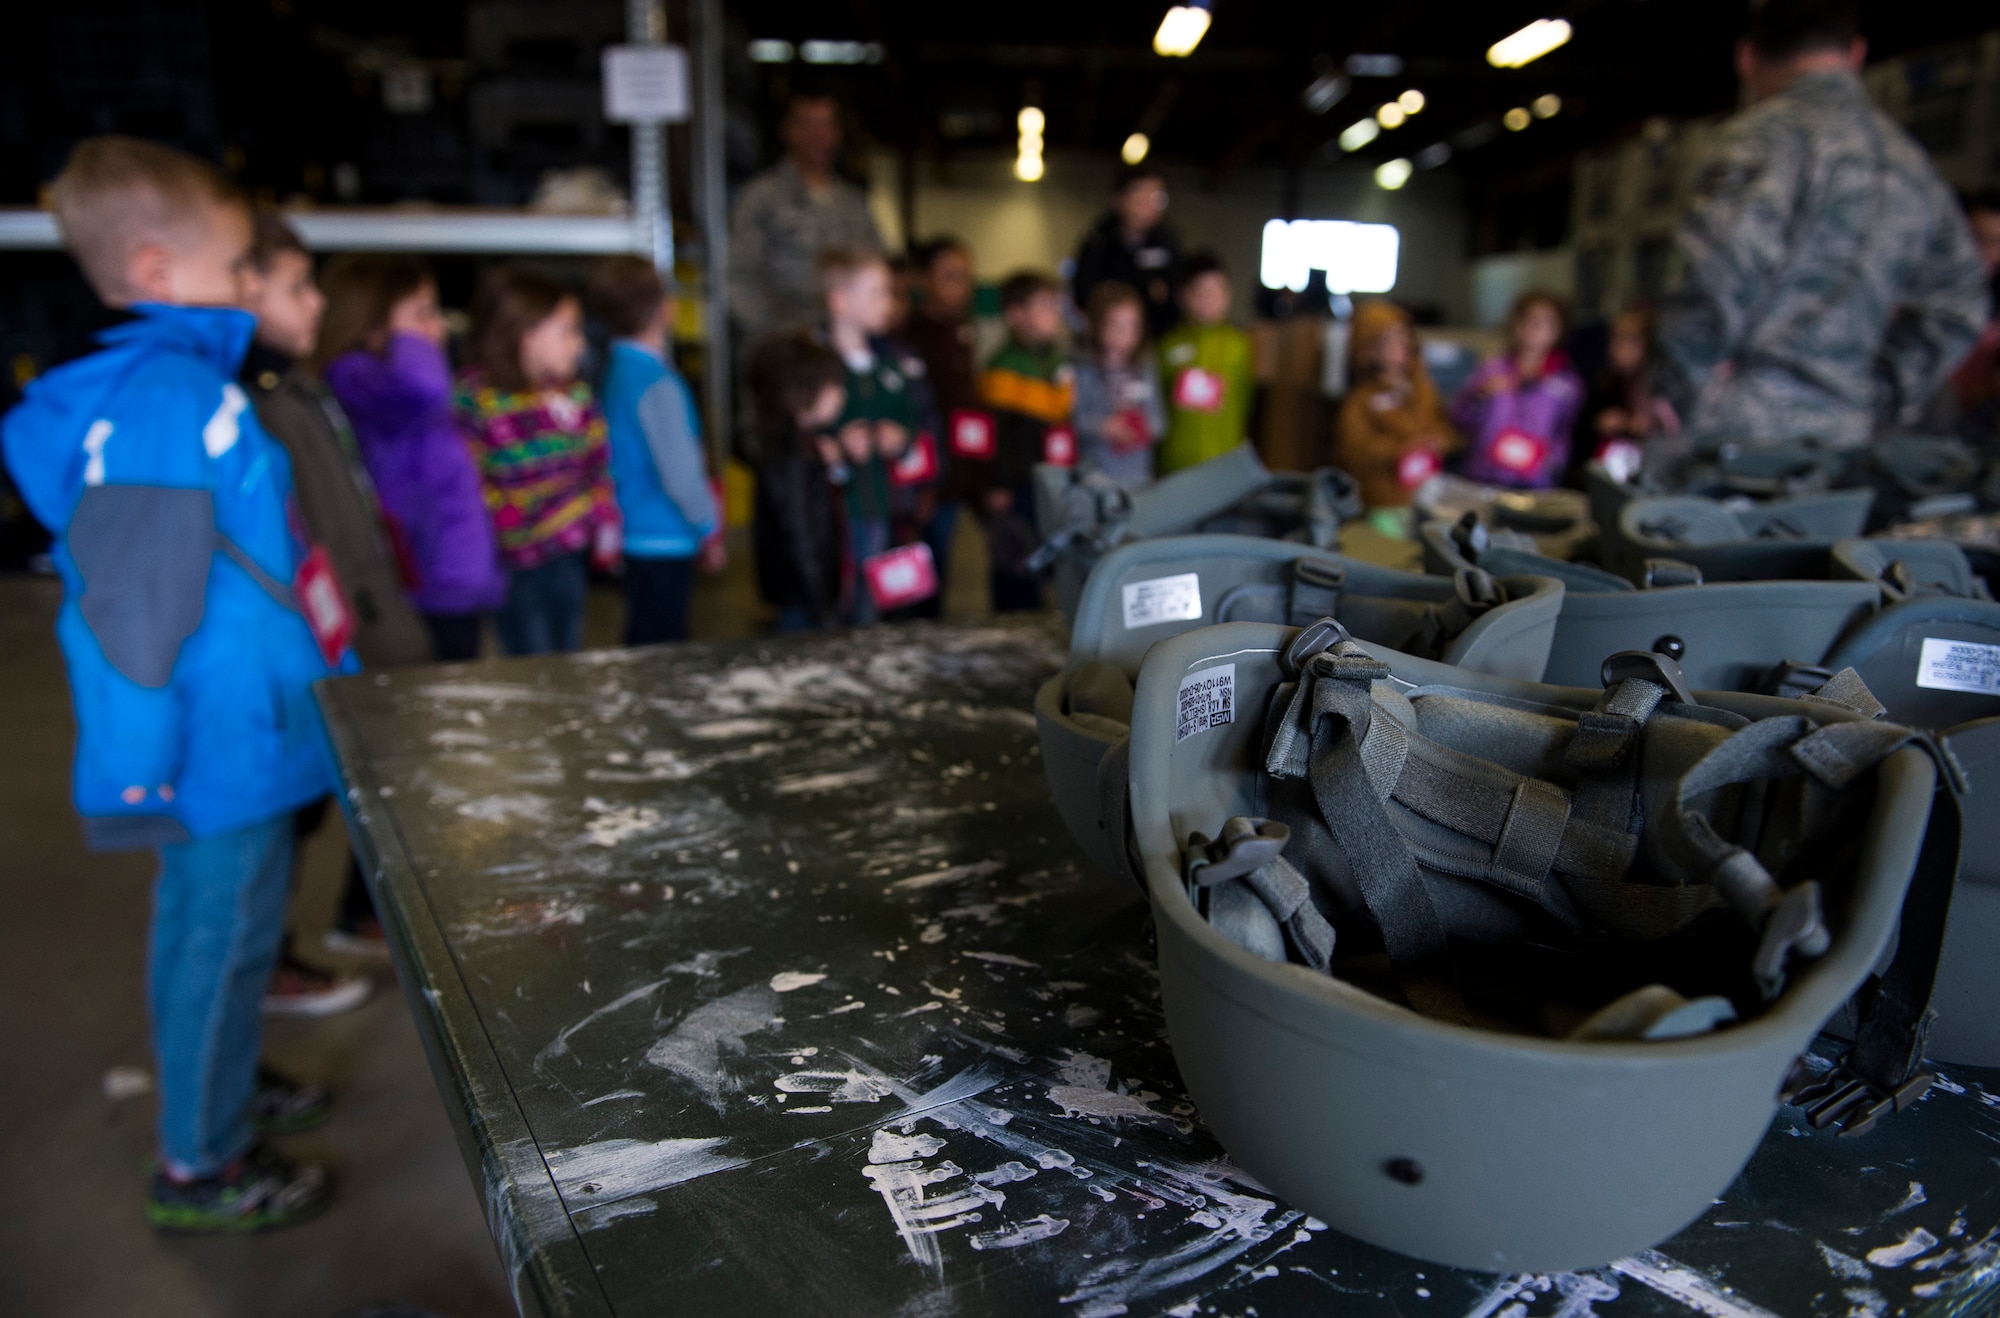 Helmets rest on a table during Kids’ Deployment Day at Spangdahlem Air Base, Germany, April 29, 2015. The Kids’ Deployment Day consisted of nearly 600 students ranging from kindergarden to sixth grade learning the process their parents might have to go through before a deployment. (U.S. Air Force photo by Airman 1st Class Luke Kitterman/Released)  
